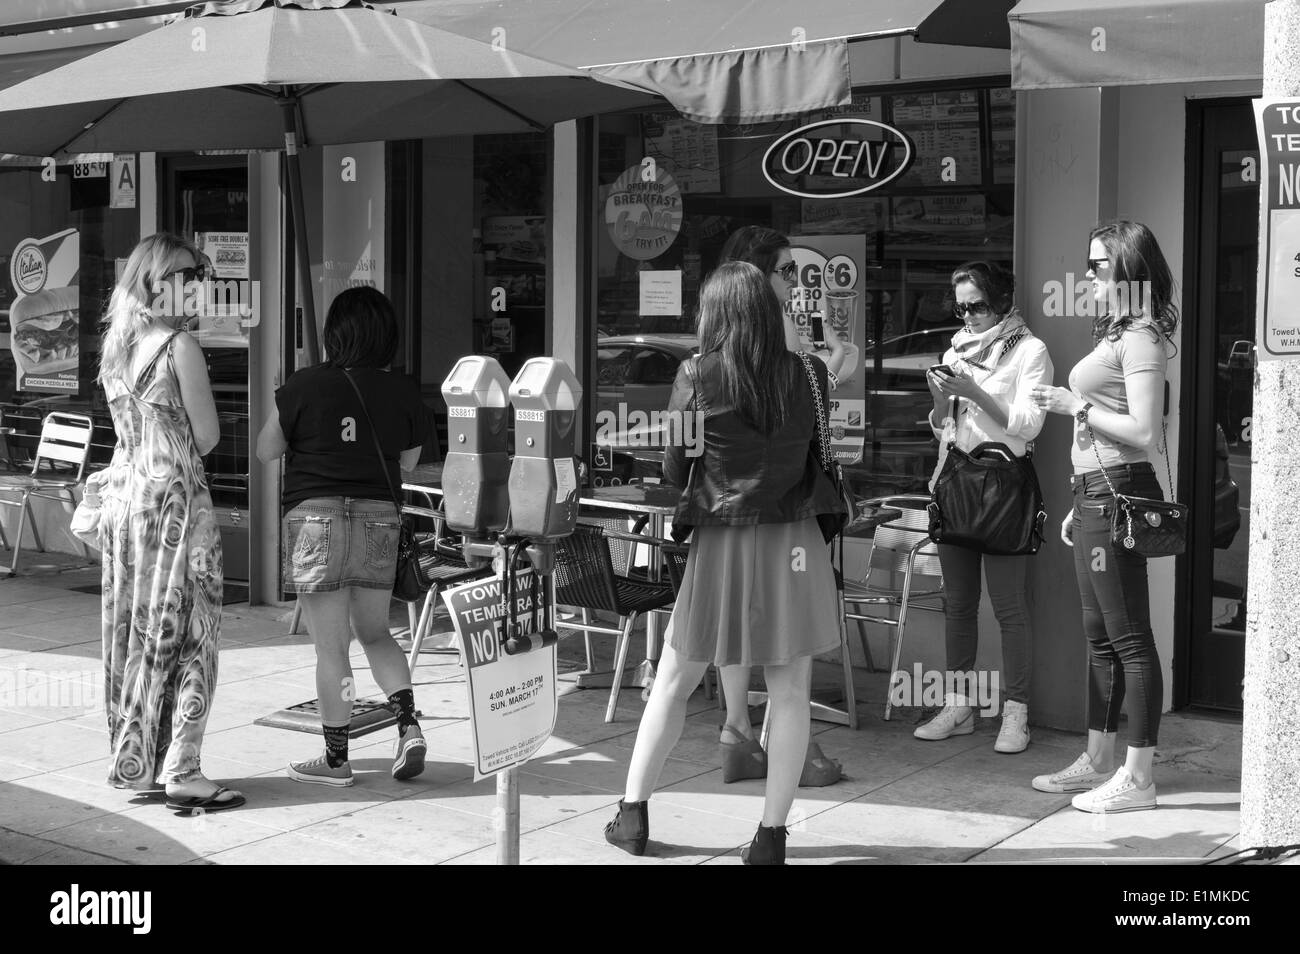 Women standing and talking on the street, Sunset Boulevard, Los Angeles, CA. Stock Photo